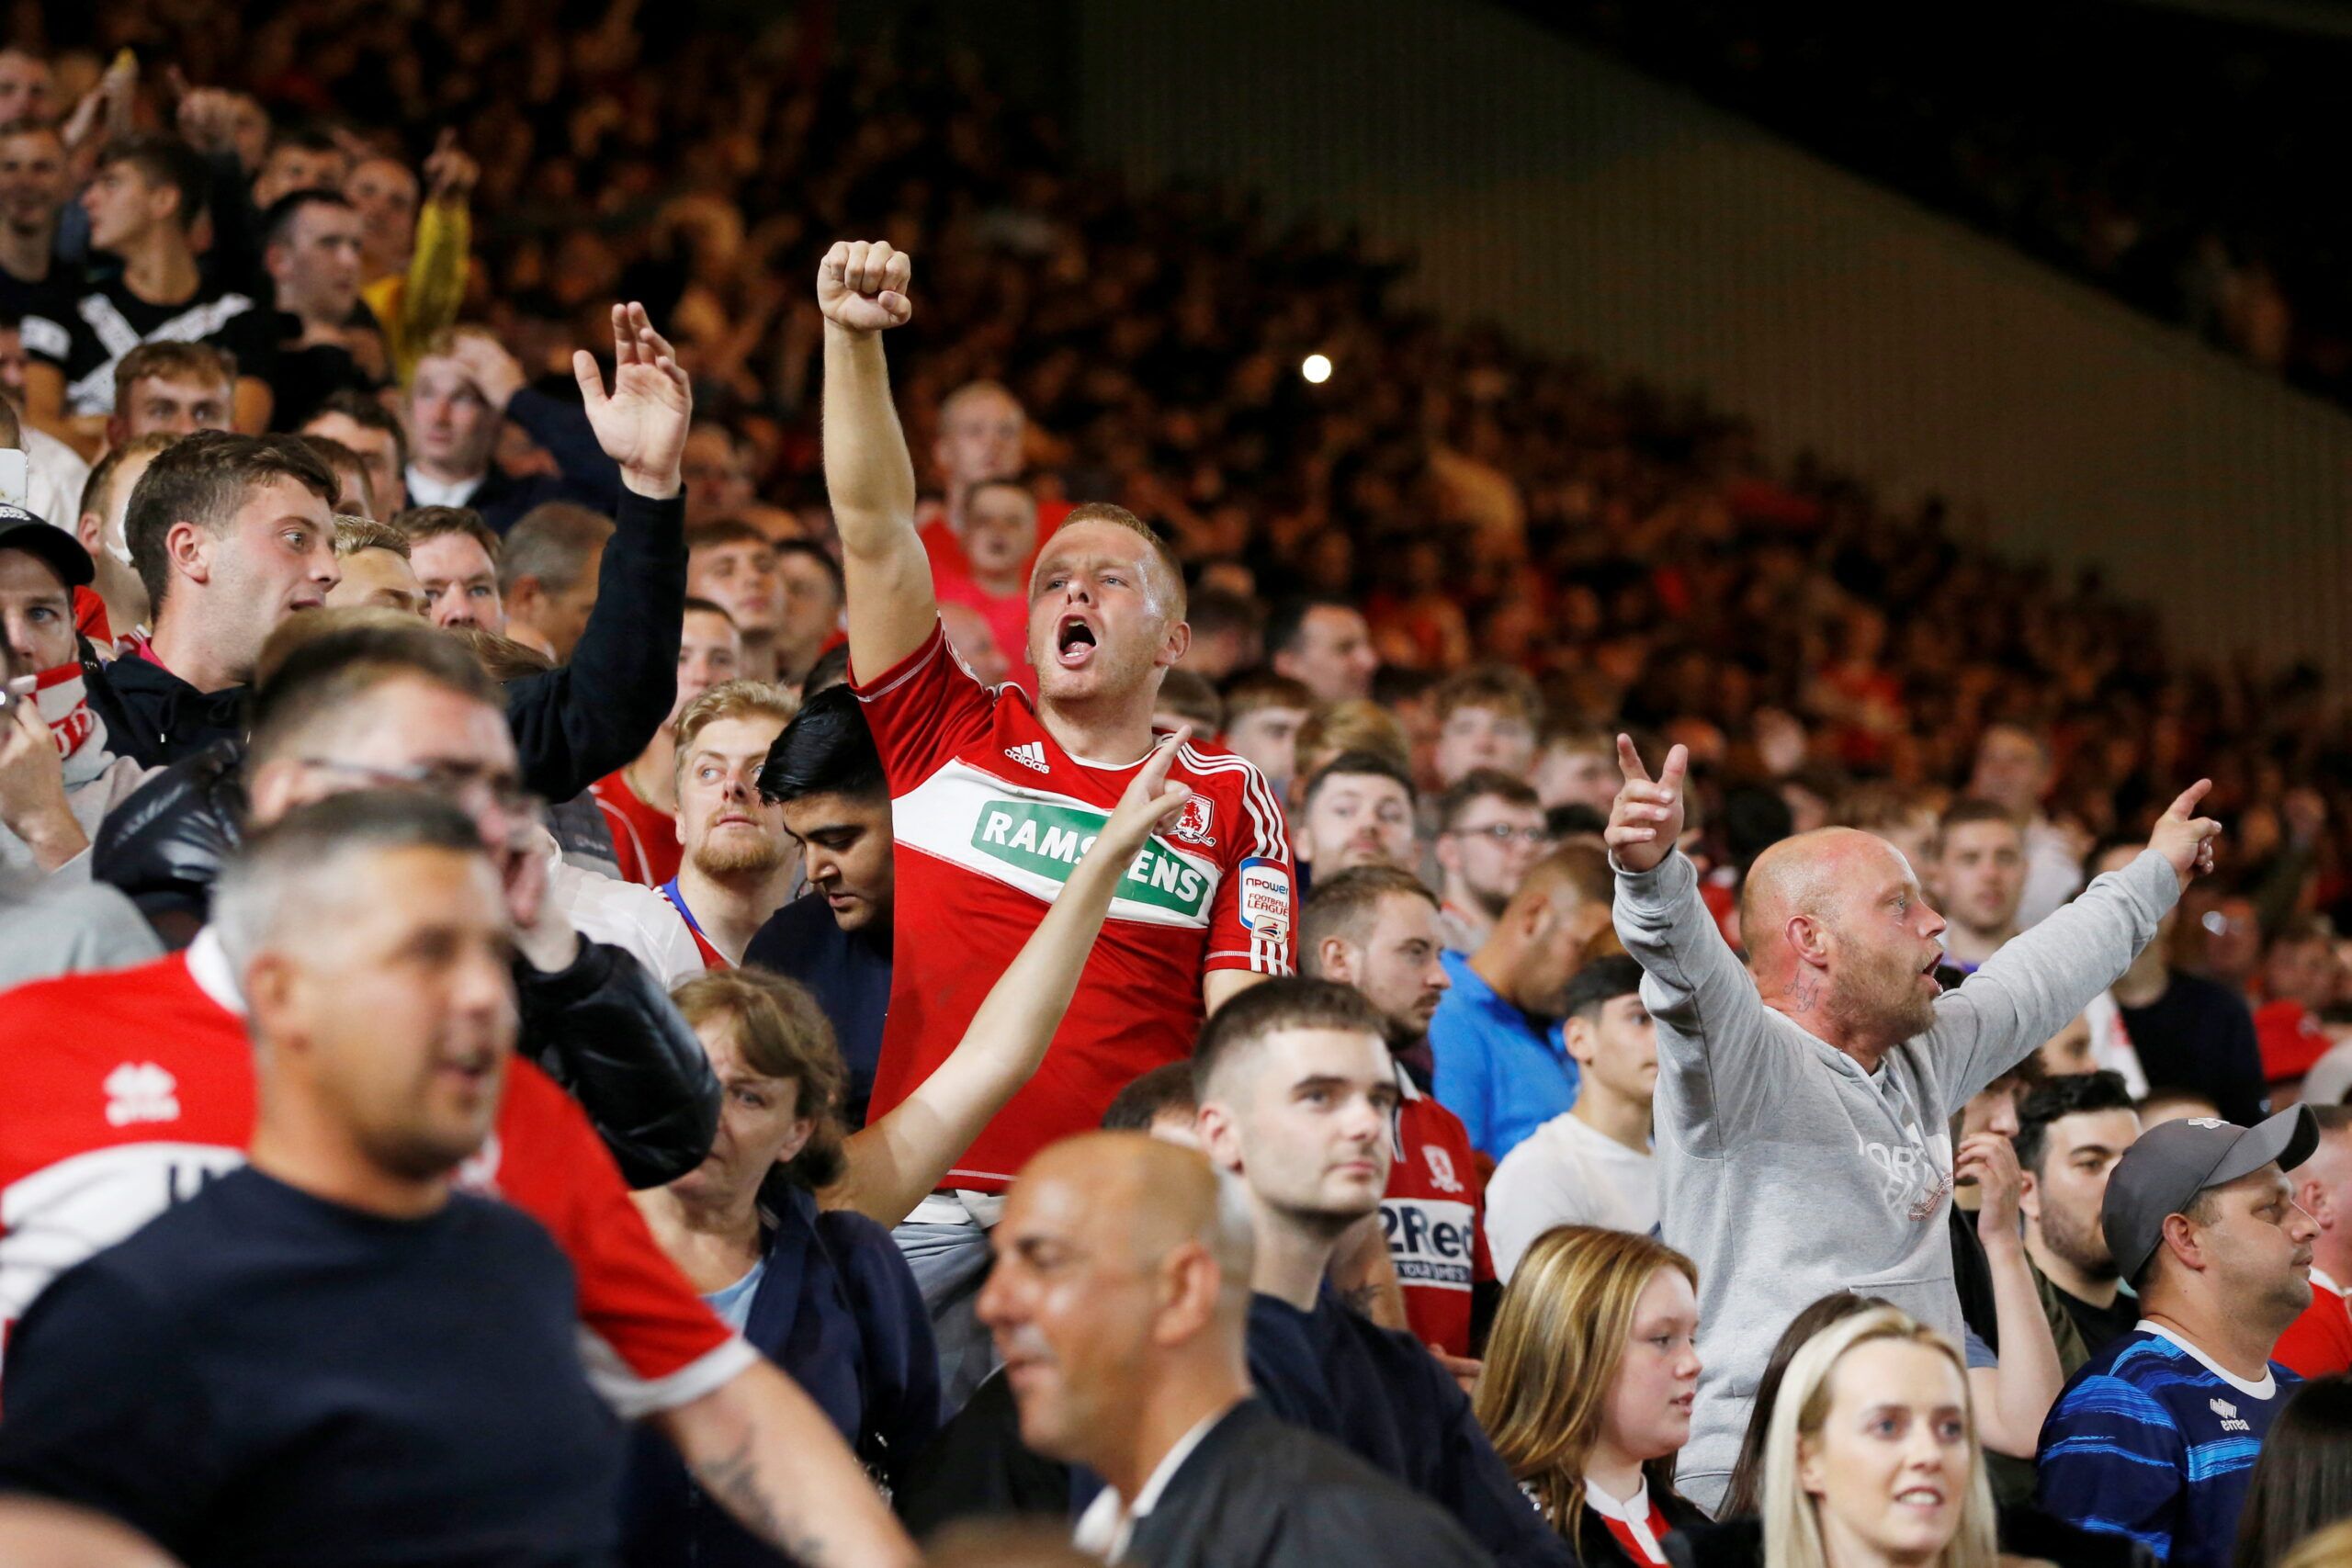 Soccer Football - Championship - Middlesbrough v Sunderland - Riverside Stadium, Middlesbrough, Britain - September 5, 2022  Middlesbrough fans celebrate after the match  Action Images/Ed Sykes  EDITORIAL USE ONLY. No use with unauthorized audio, video, data, fixture lists, club/league logos or 